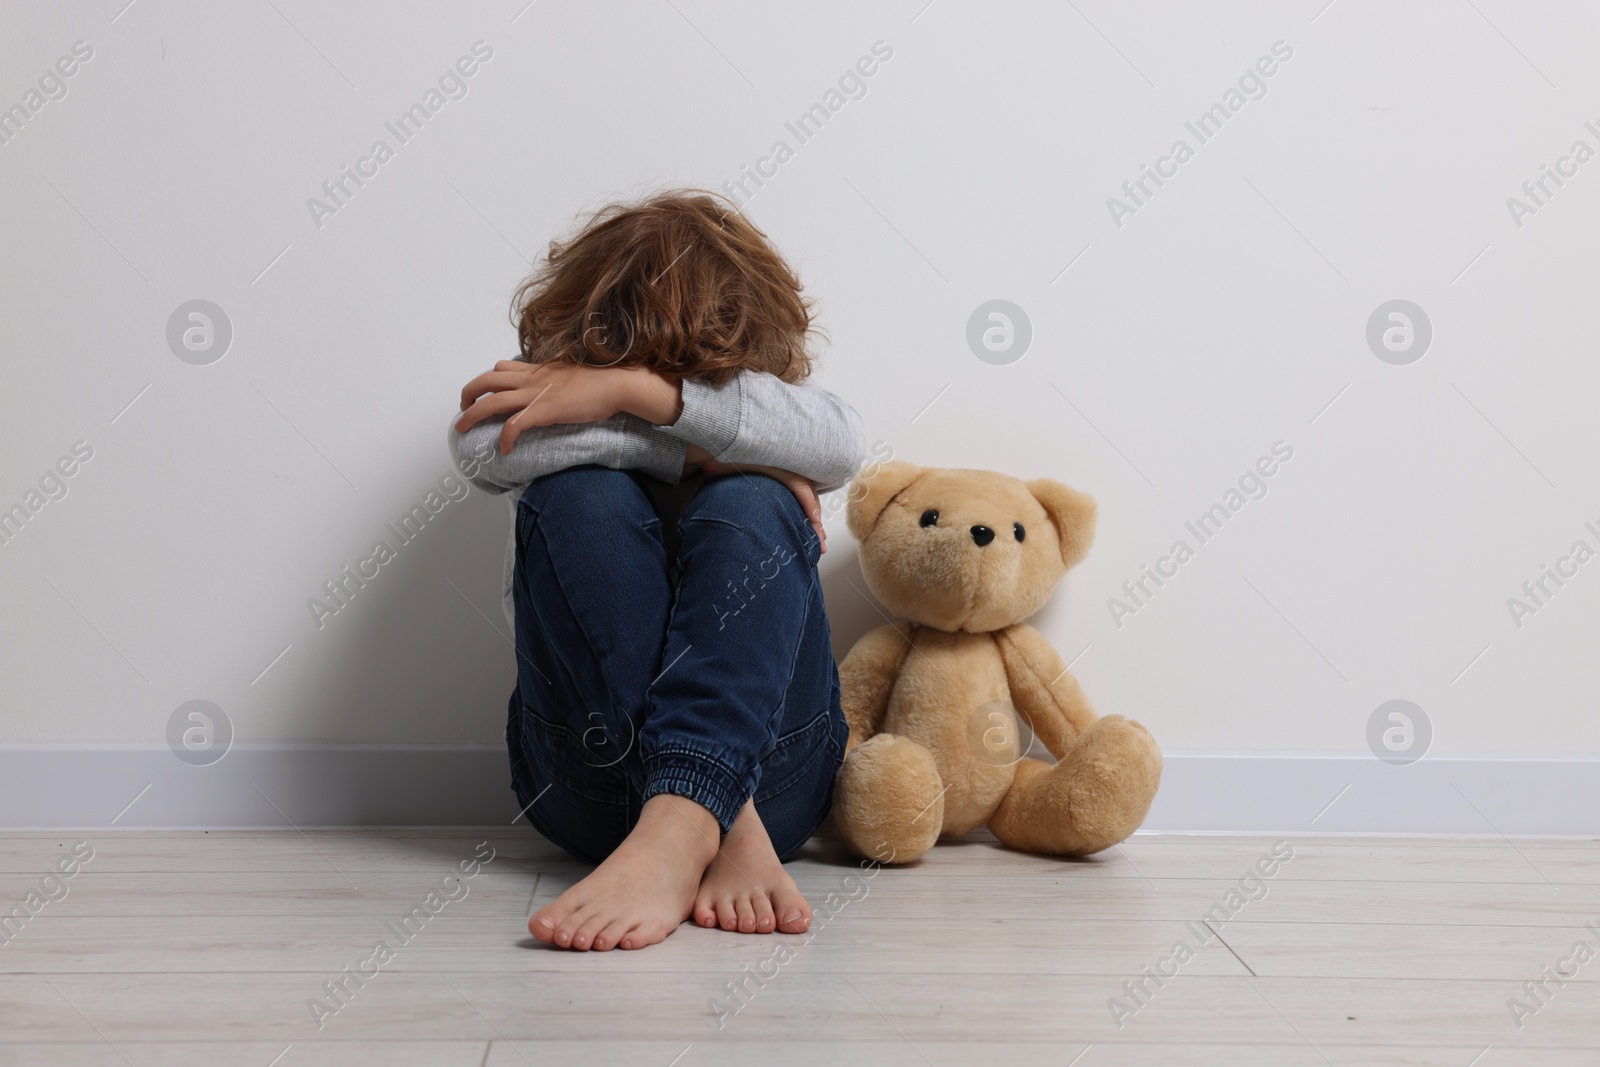 Photo of Child abuse. Upset boy with toy sitting on floor near white wall